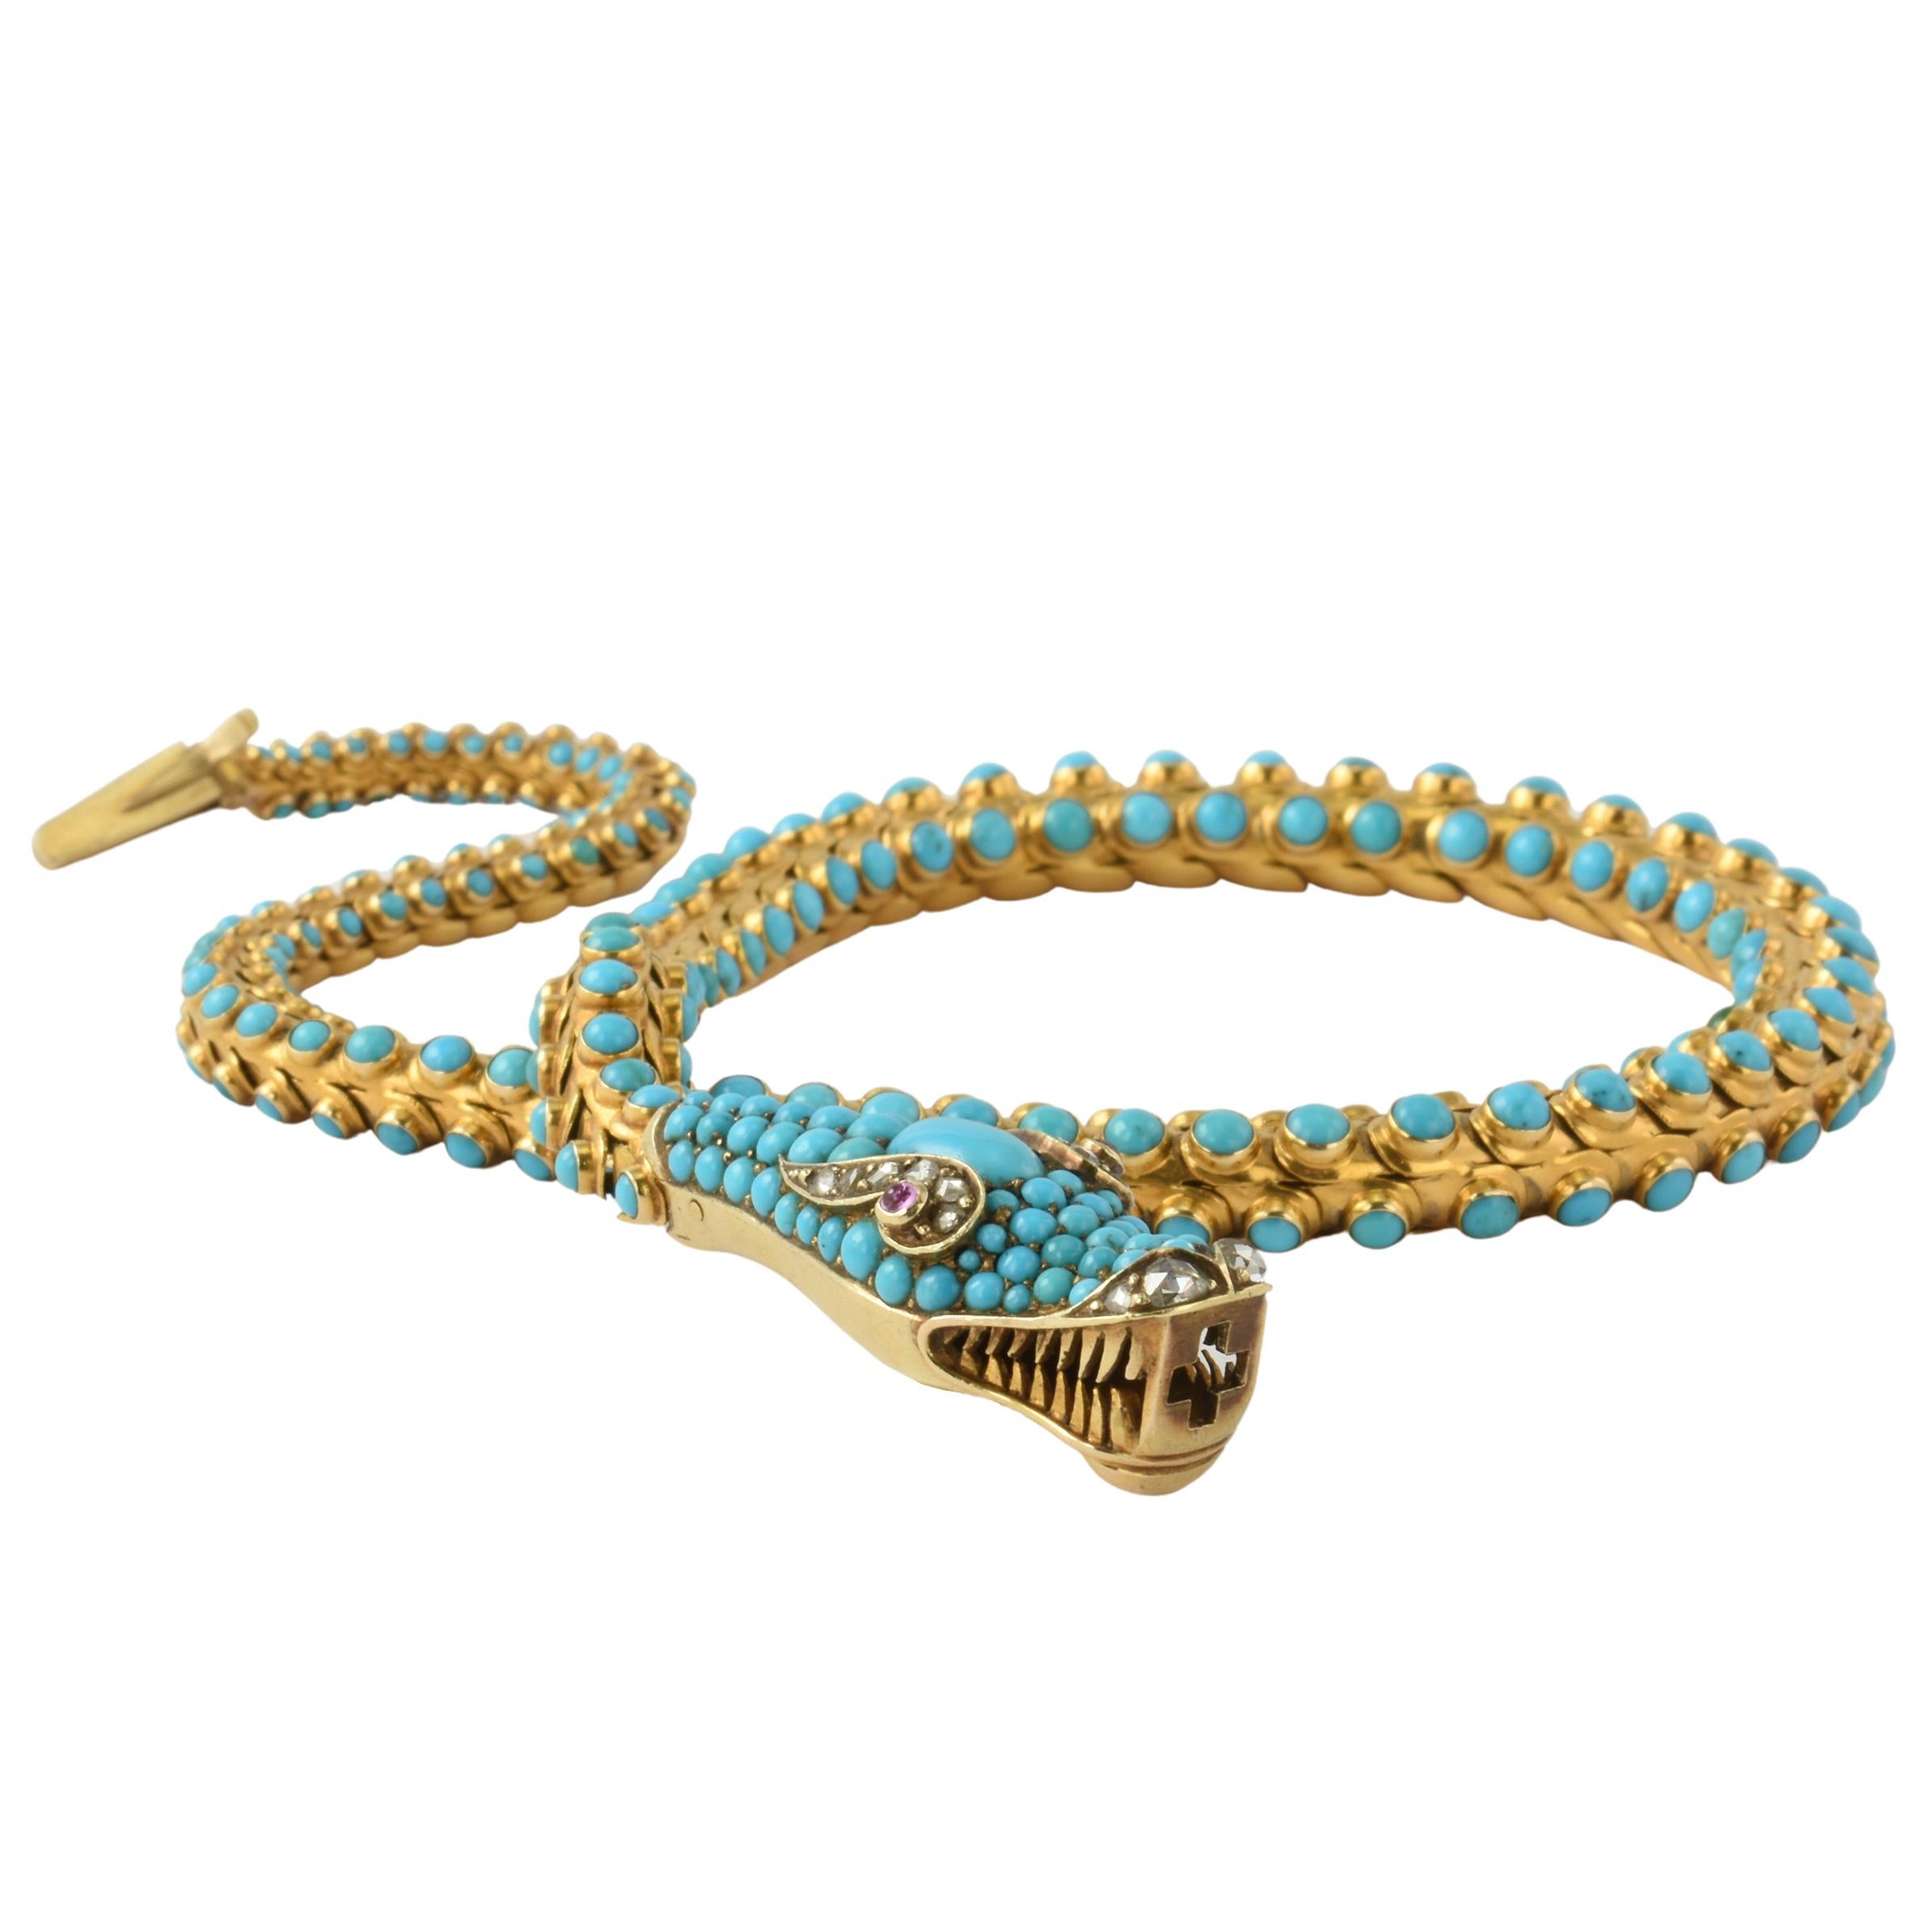 An Wonderful Victorian period snake necklace. Crafted from 15k gold set with cabochon turquoise, rose cut diamonds & rubies. The body is articulated offering realistic movement and flexibility. This versatile necklace can be wrapped around the wrist